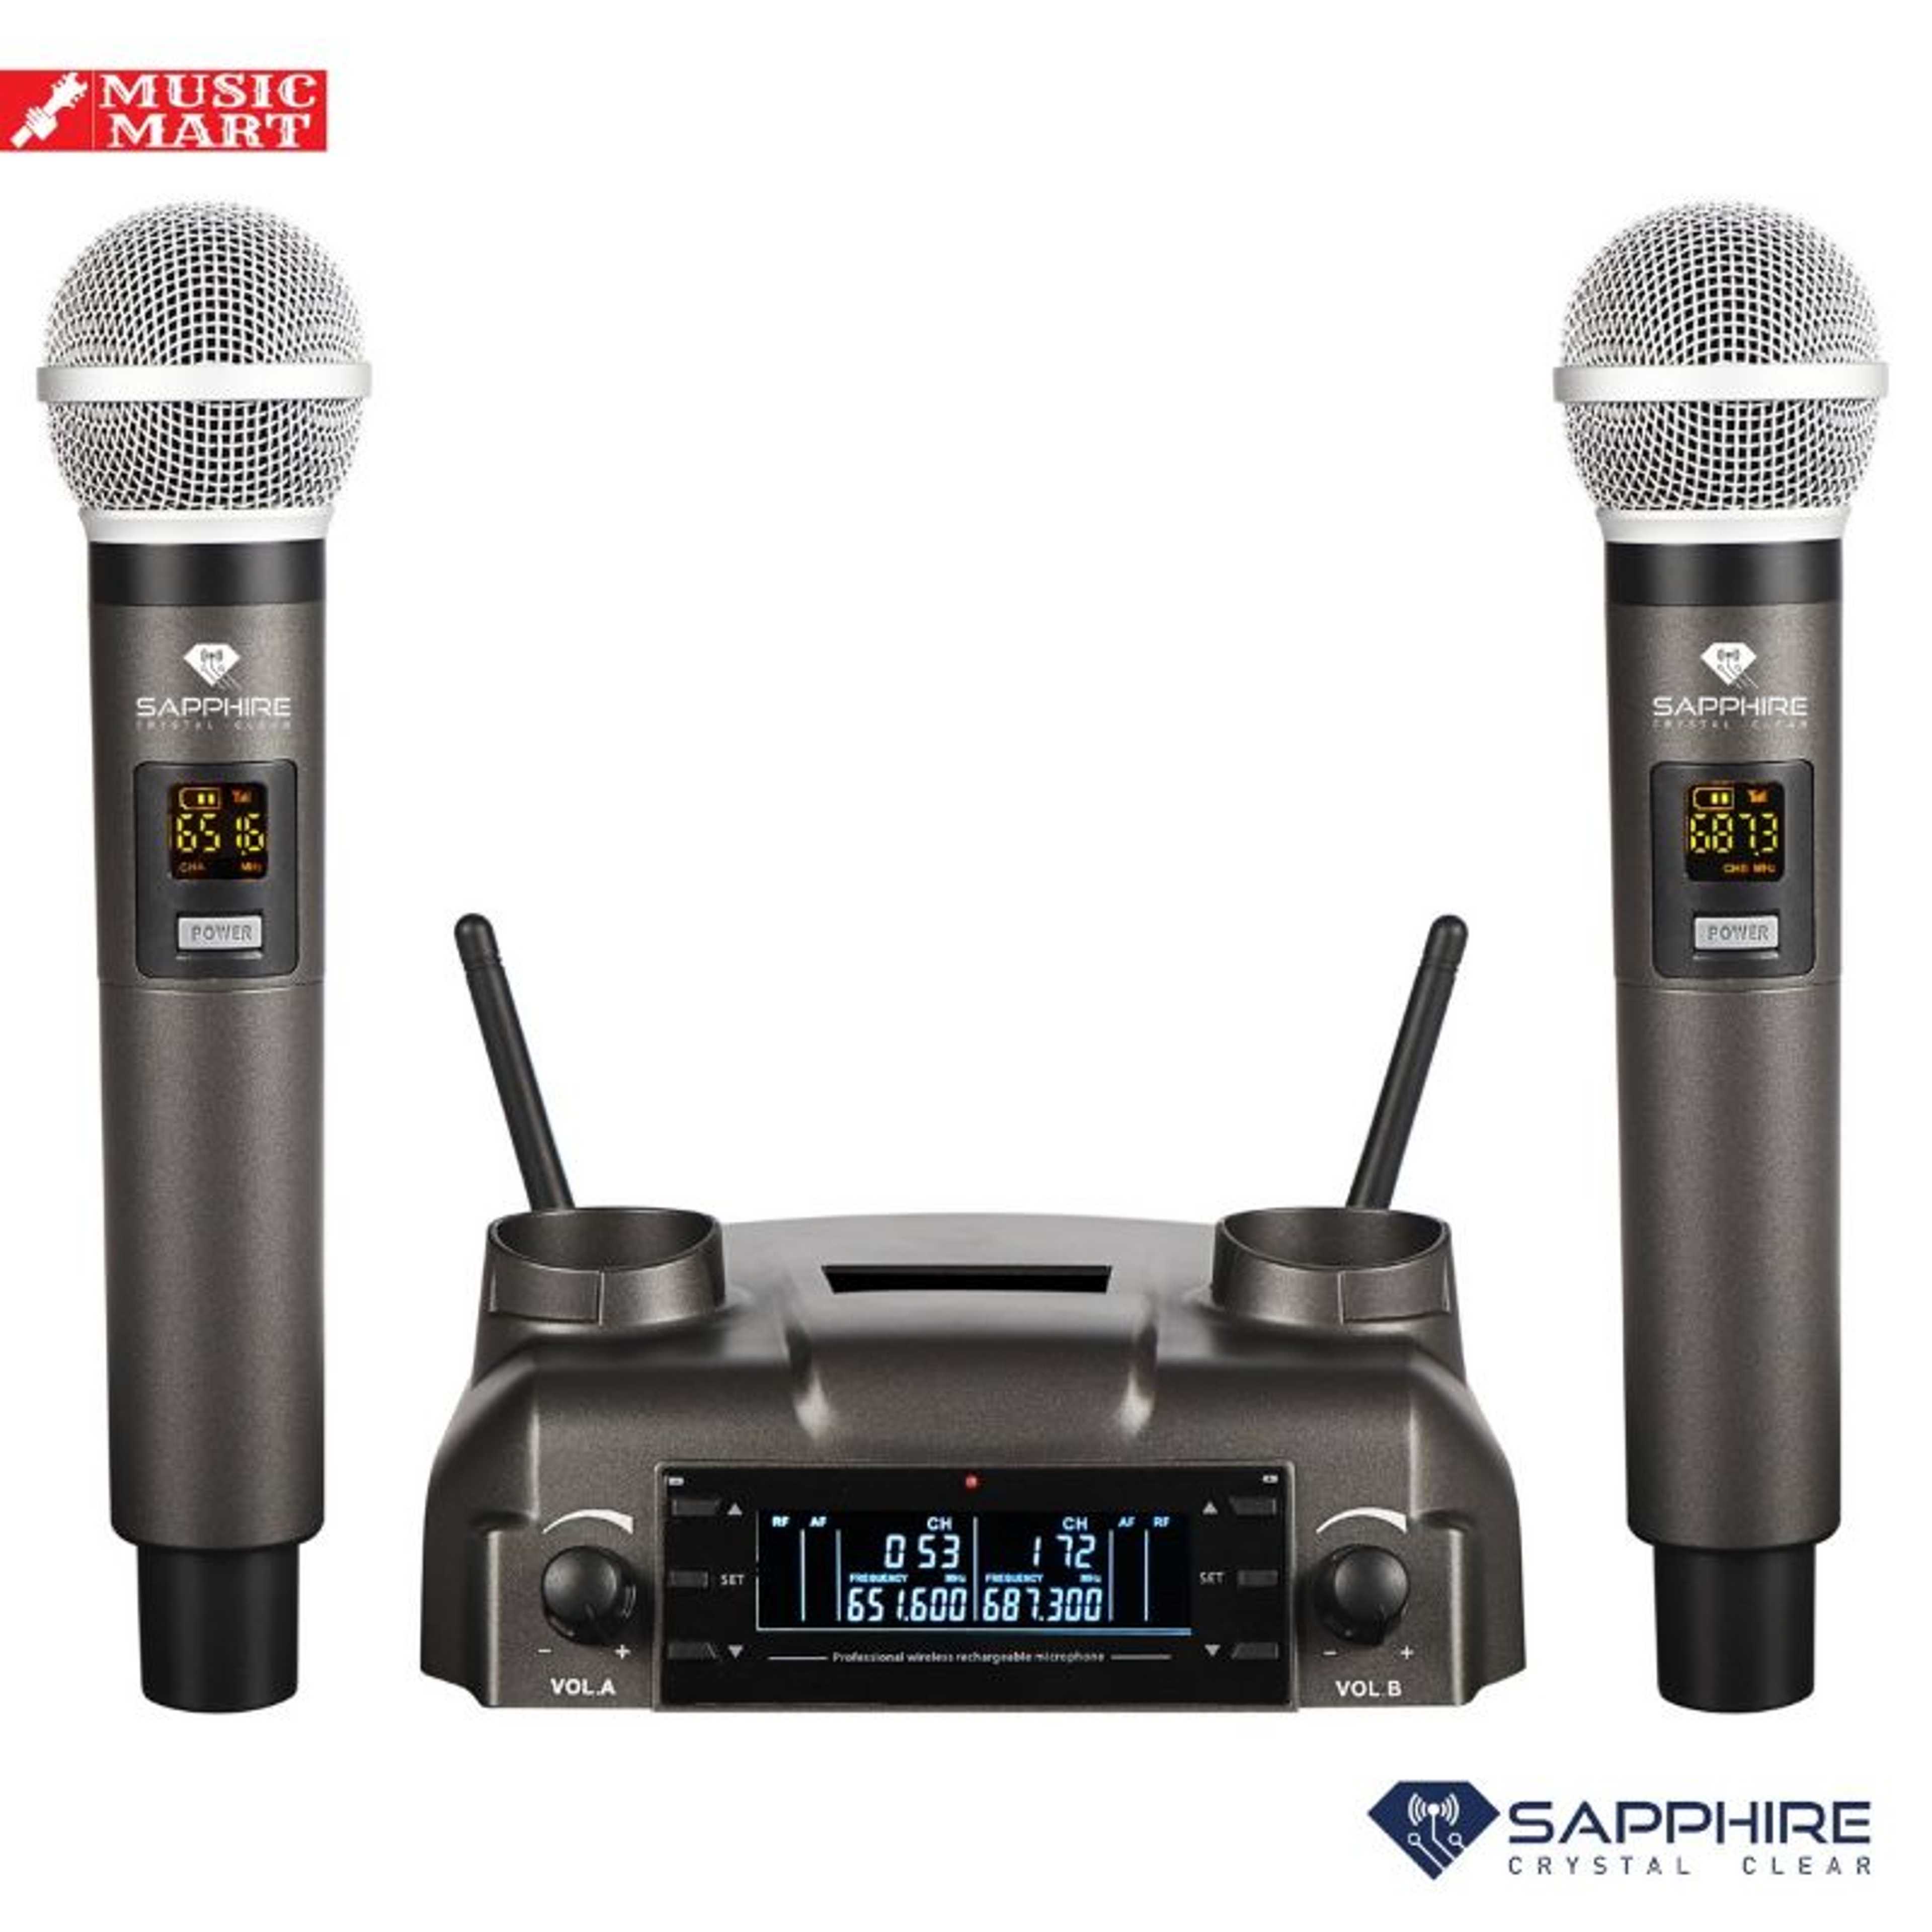 PRO DUAL RECHARGEABLE HANDHELD DYNAMIC MICROPHONES WIRELESS SYSTEM -  HIGH PRODUCTION OF MUSIC - EXCELLENT QUALITY - FREQUENCY UPTO 200Ft - STABLE SIGNAL & CLEAR SOUND - INDEPENDENT MIC VOLUME CONTROL - HASSLE FREE RECHARGING